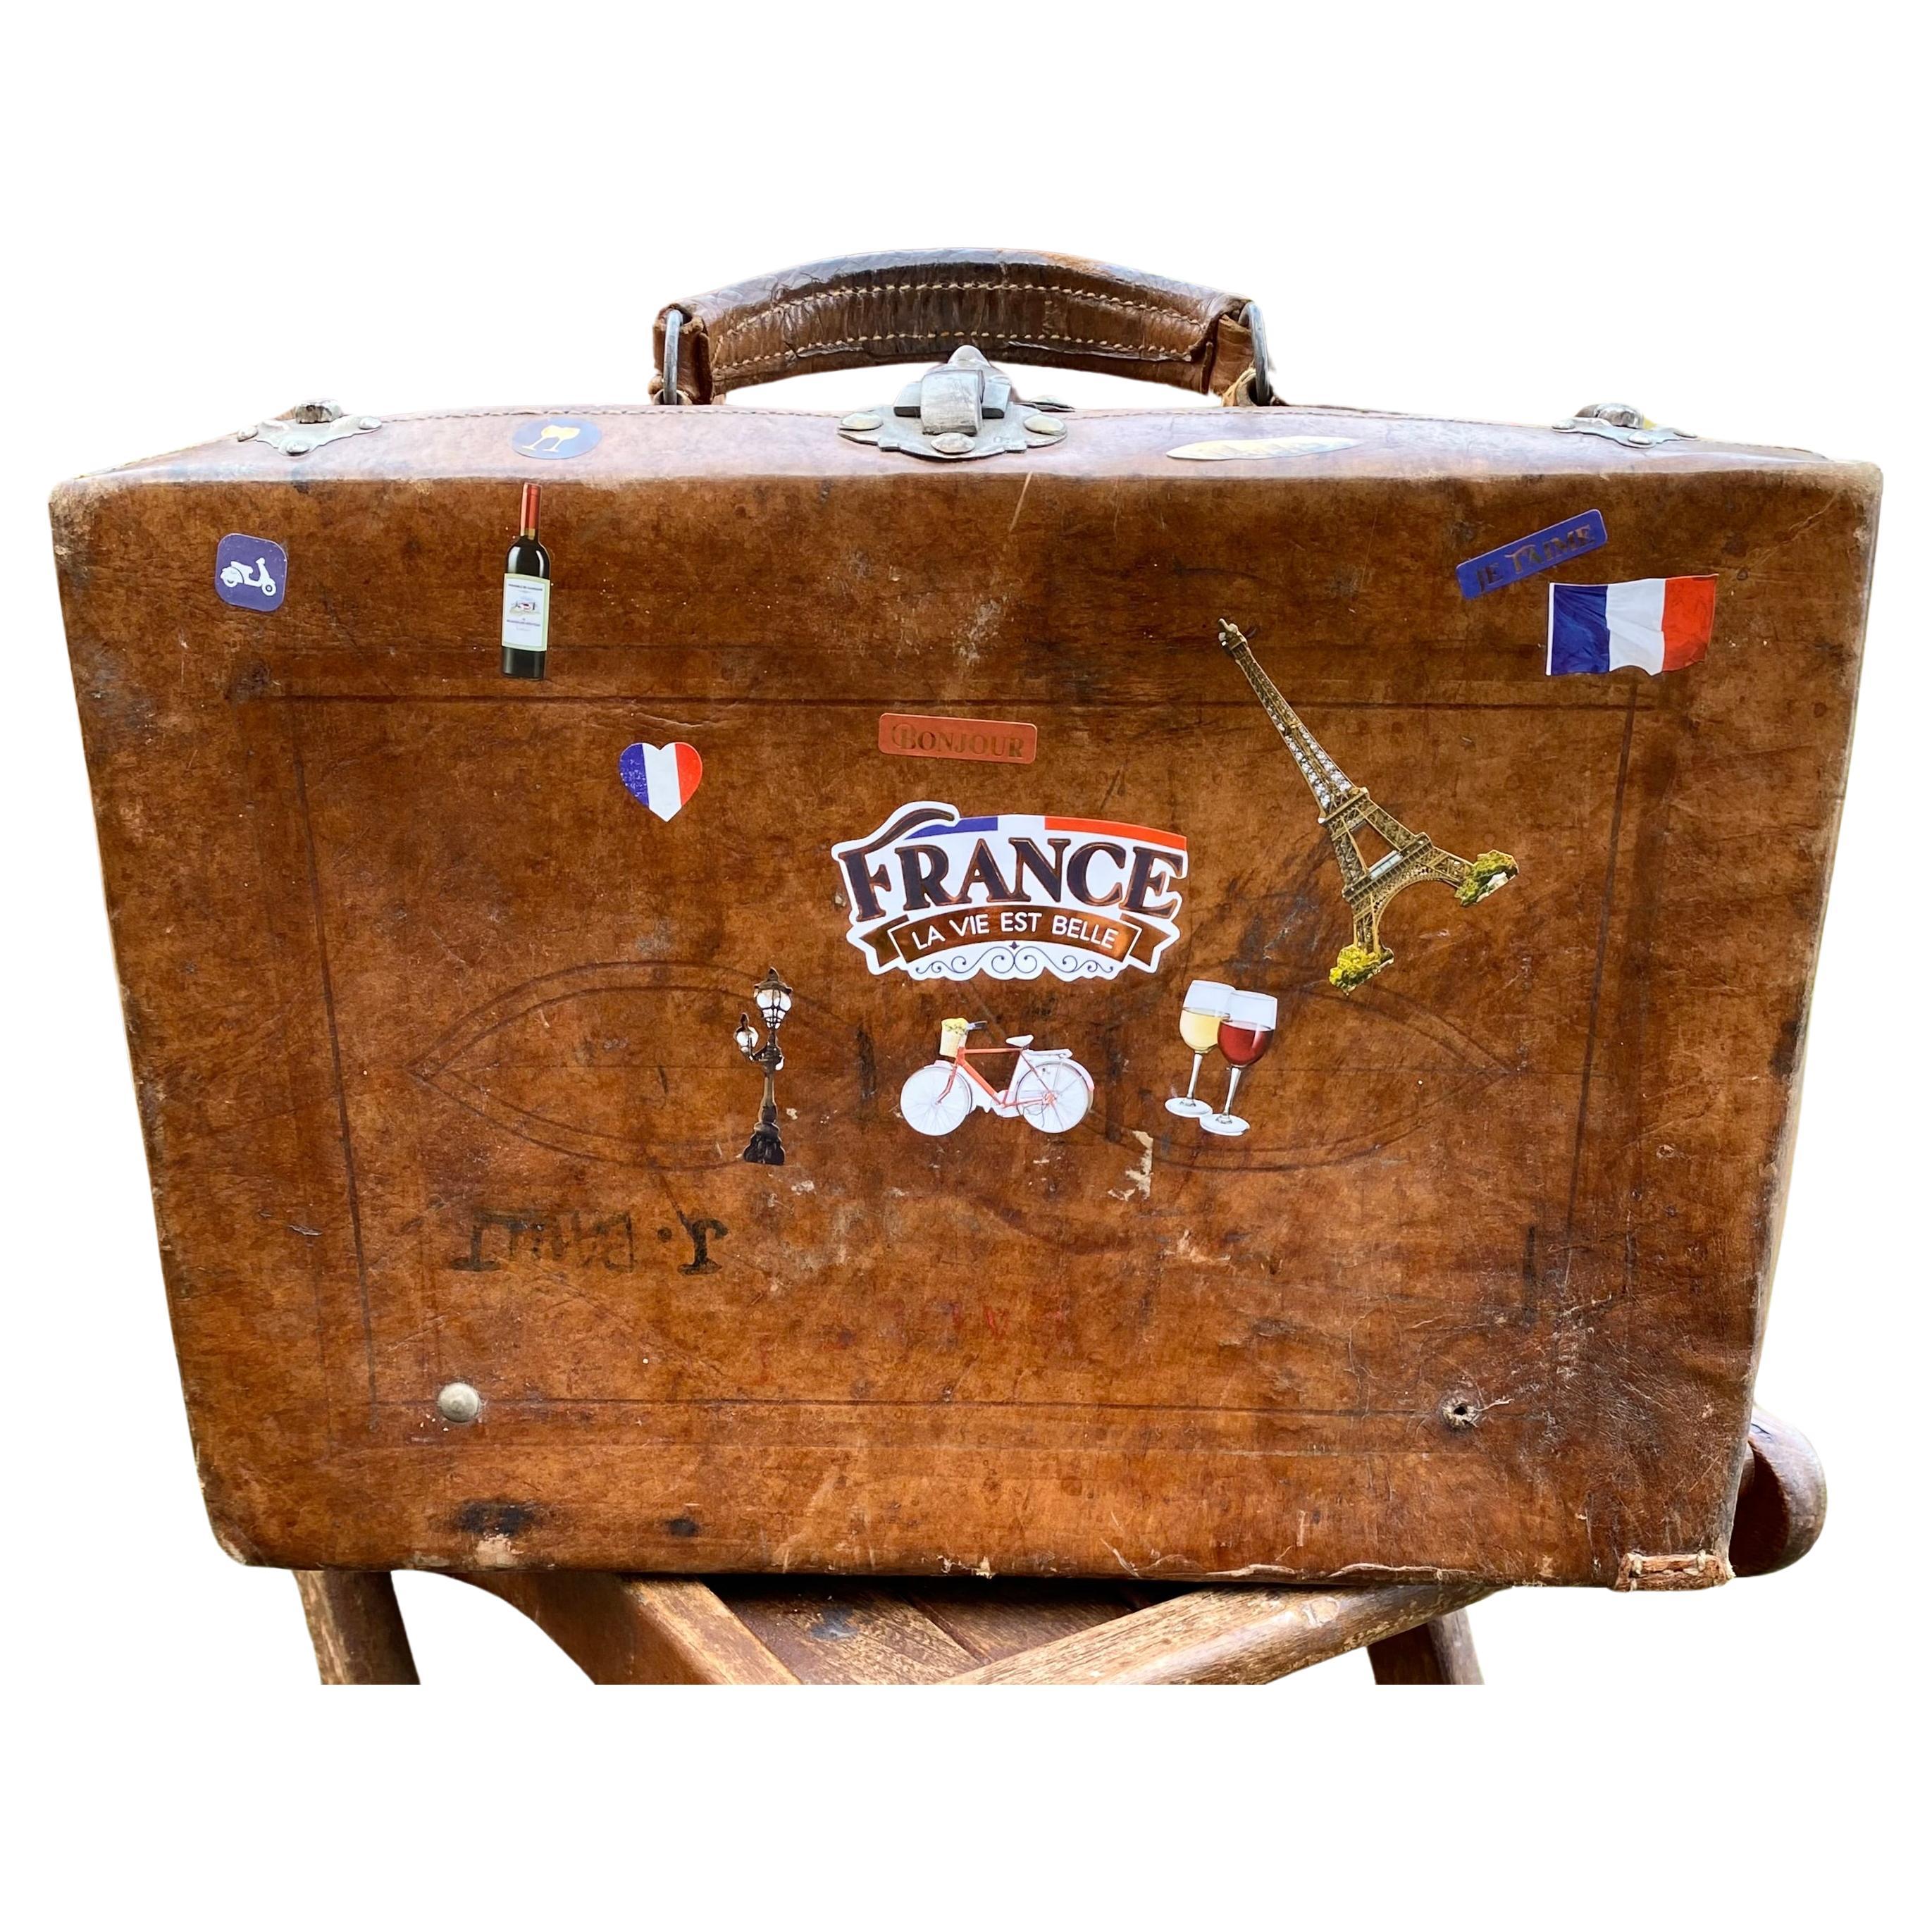 Early 1900s Antique Thick Cowhide Leather Suitcase With Solid Brass Hardware. It is Completely Hand Made - Hand Stitched - Constructed out of Thick - Heavy Gauge Cowhide Leather. It was Made in Franch. The Latches and Locking Mechanism ( Key Not